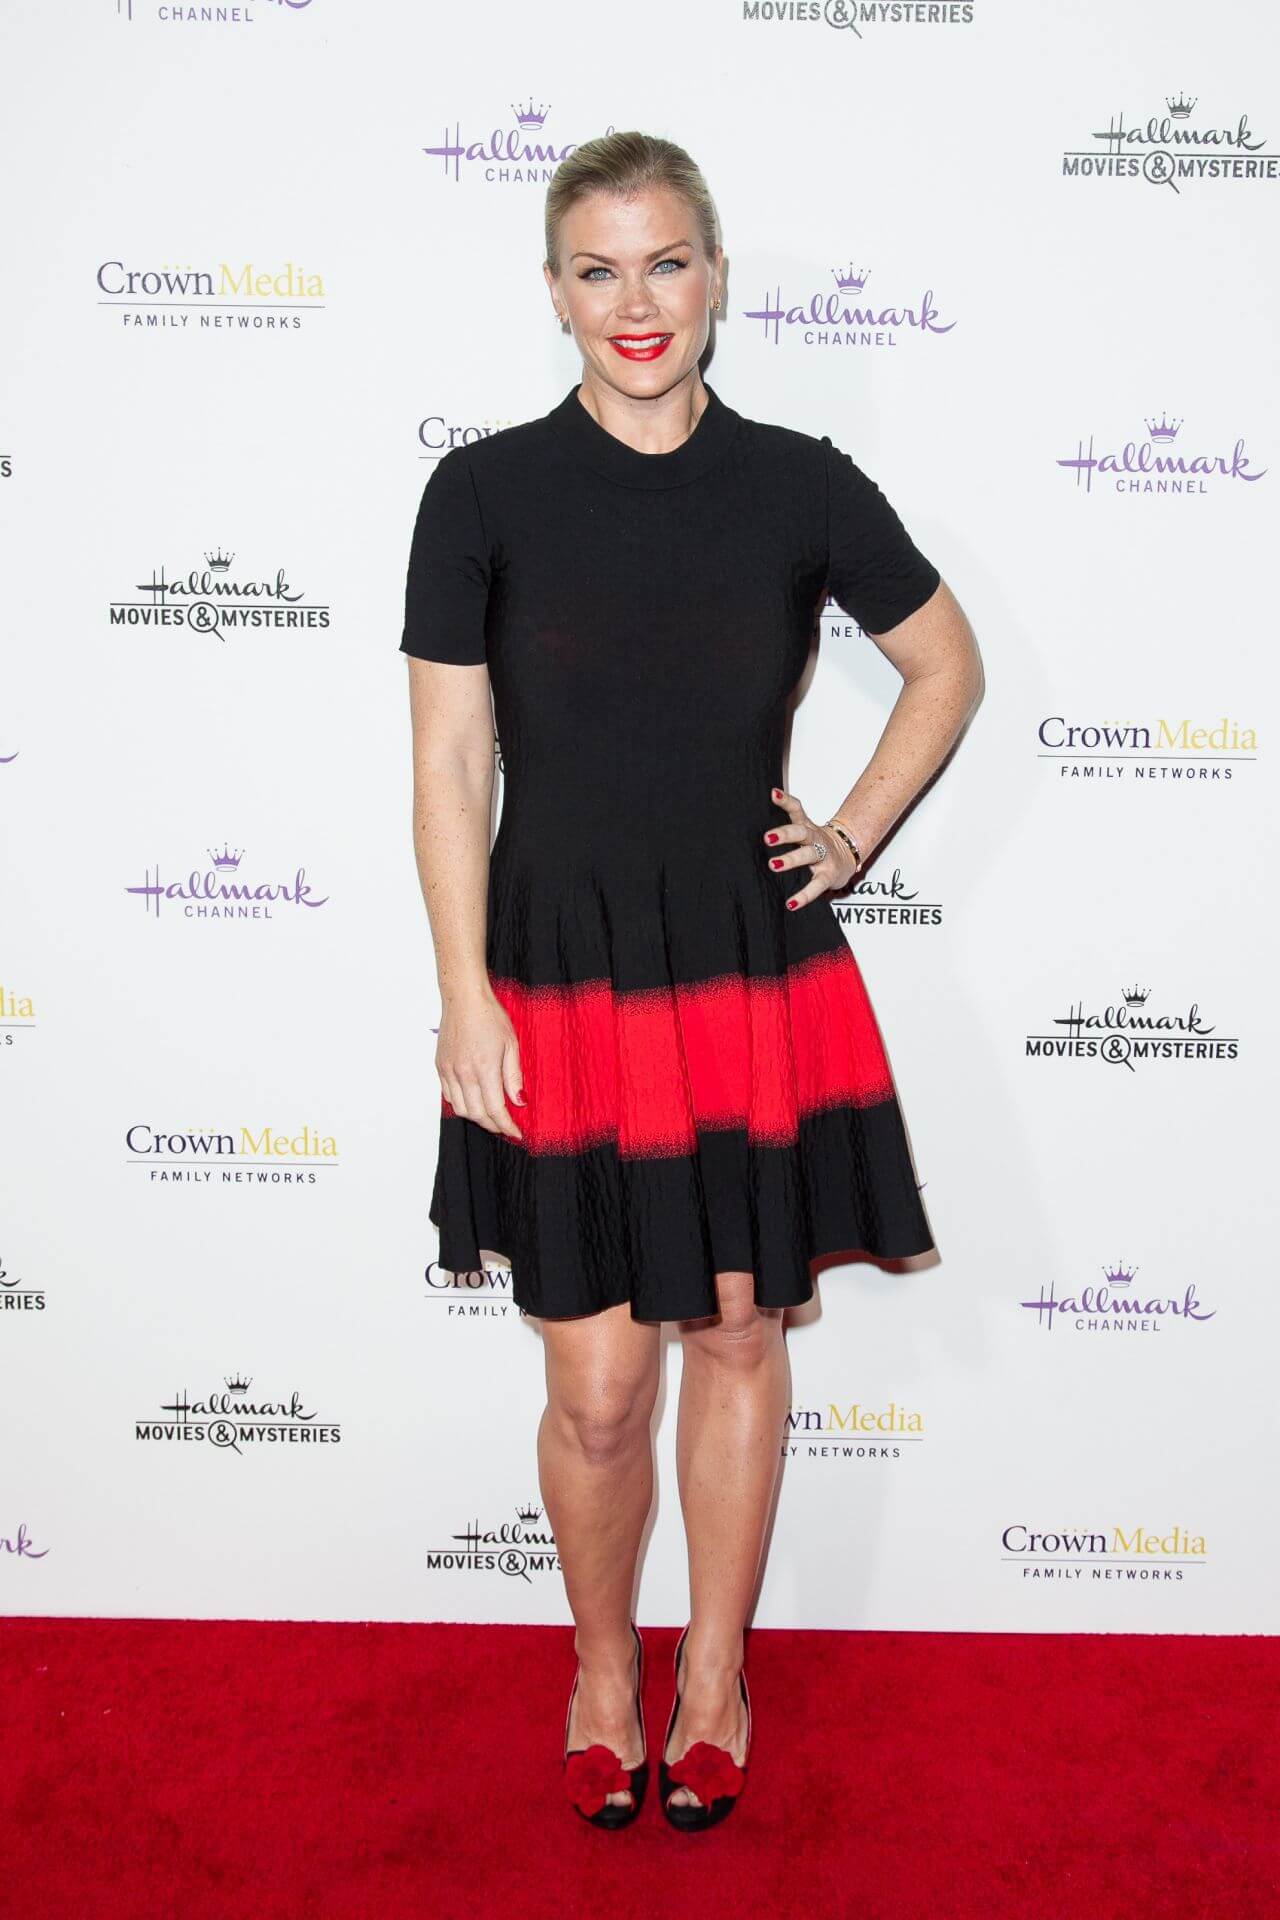 Alison Sweeney – Black Half Sleeves Short Pleated Frock Outfits -  Hallmark Channel TCA Press Tour 2015 in Pasadena